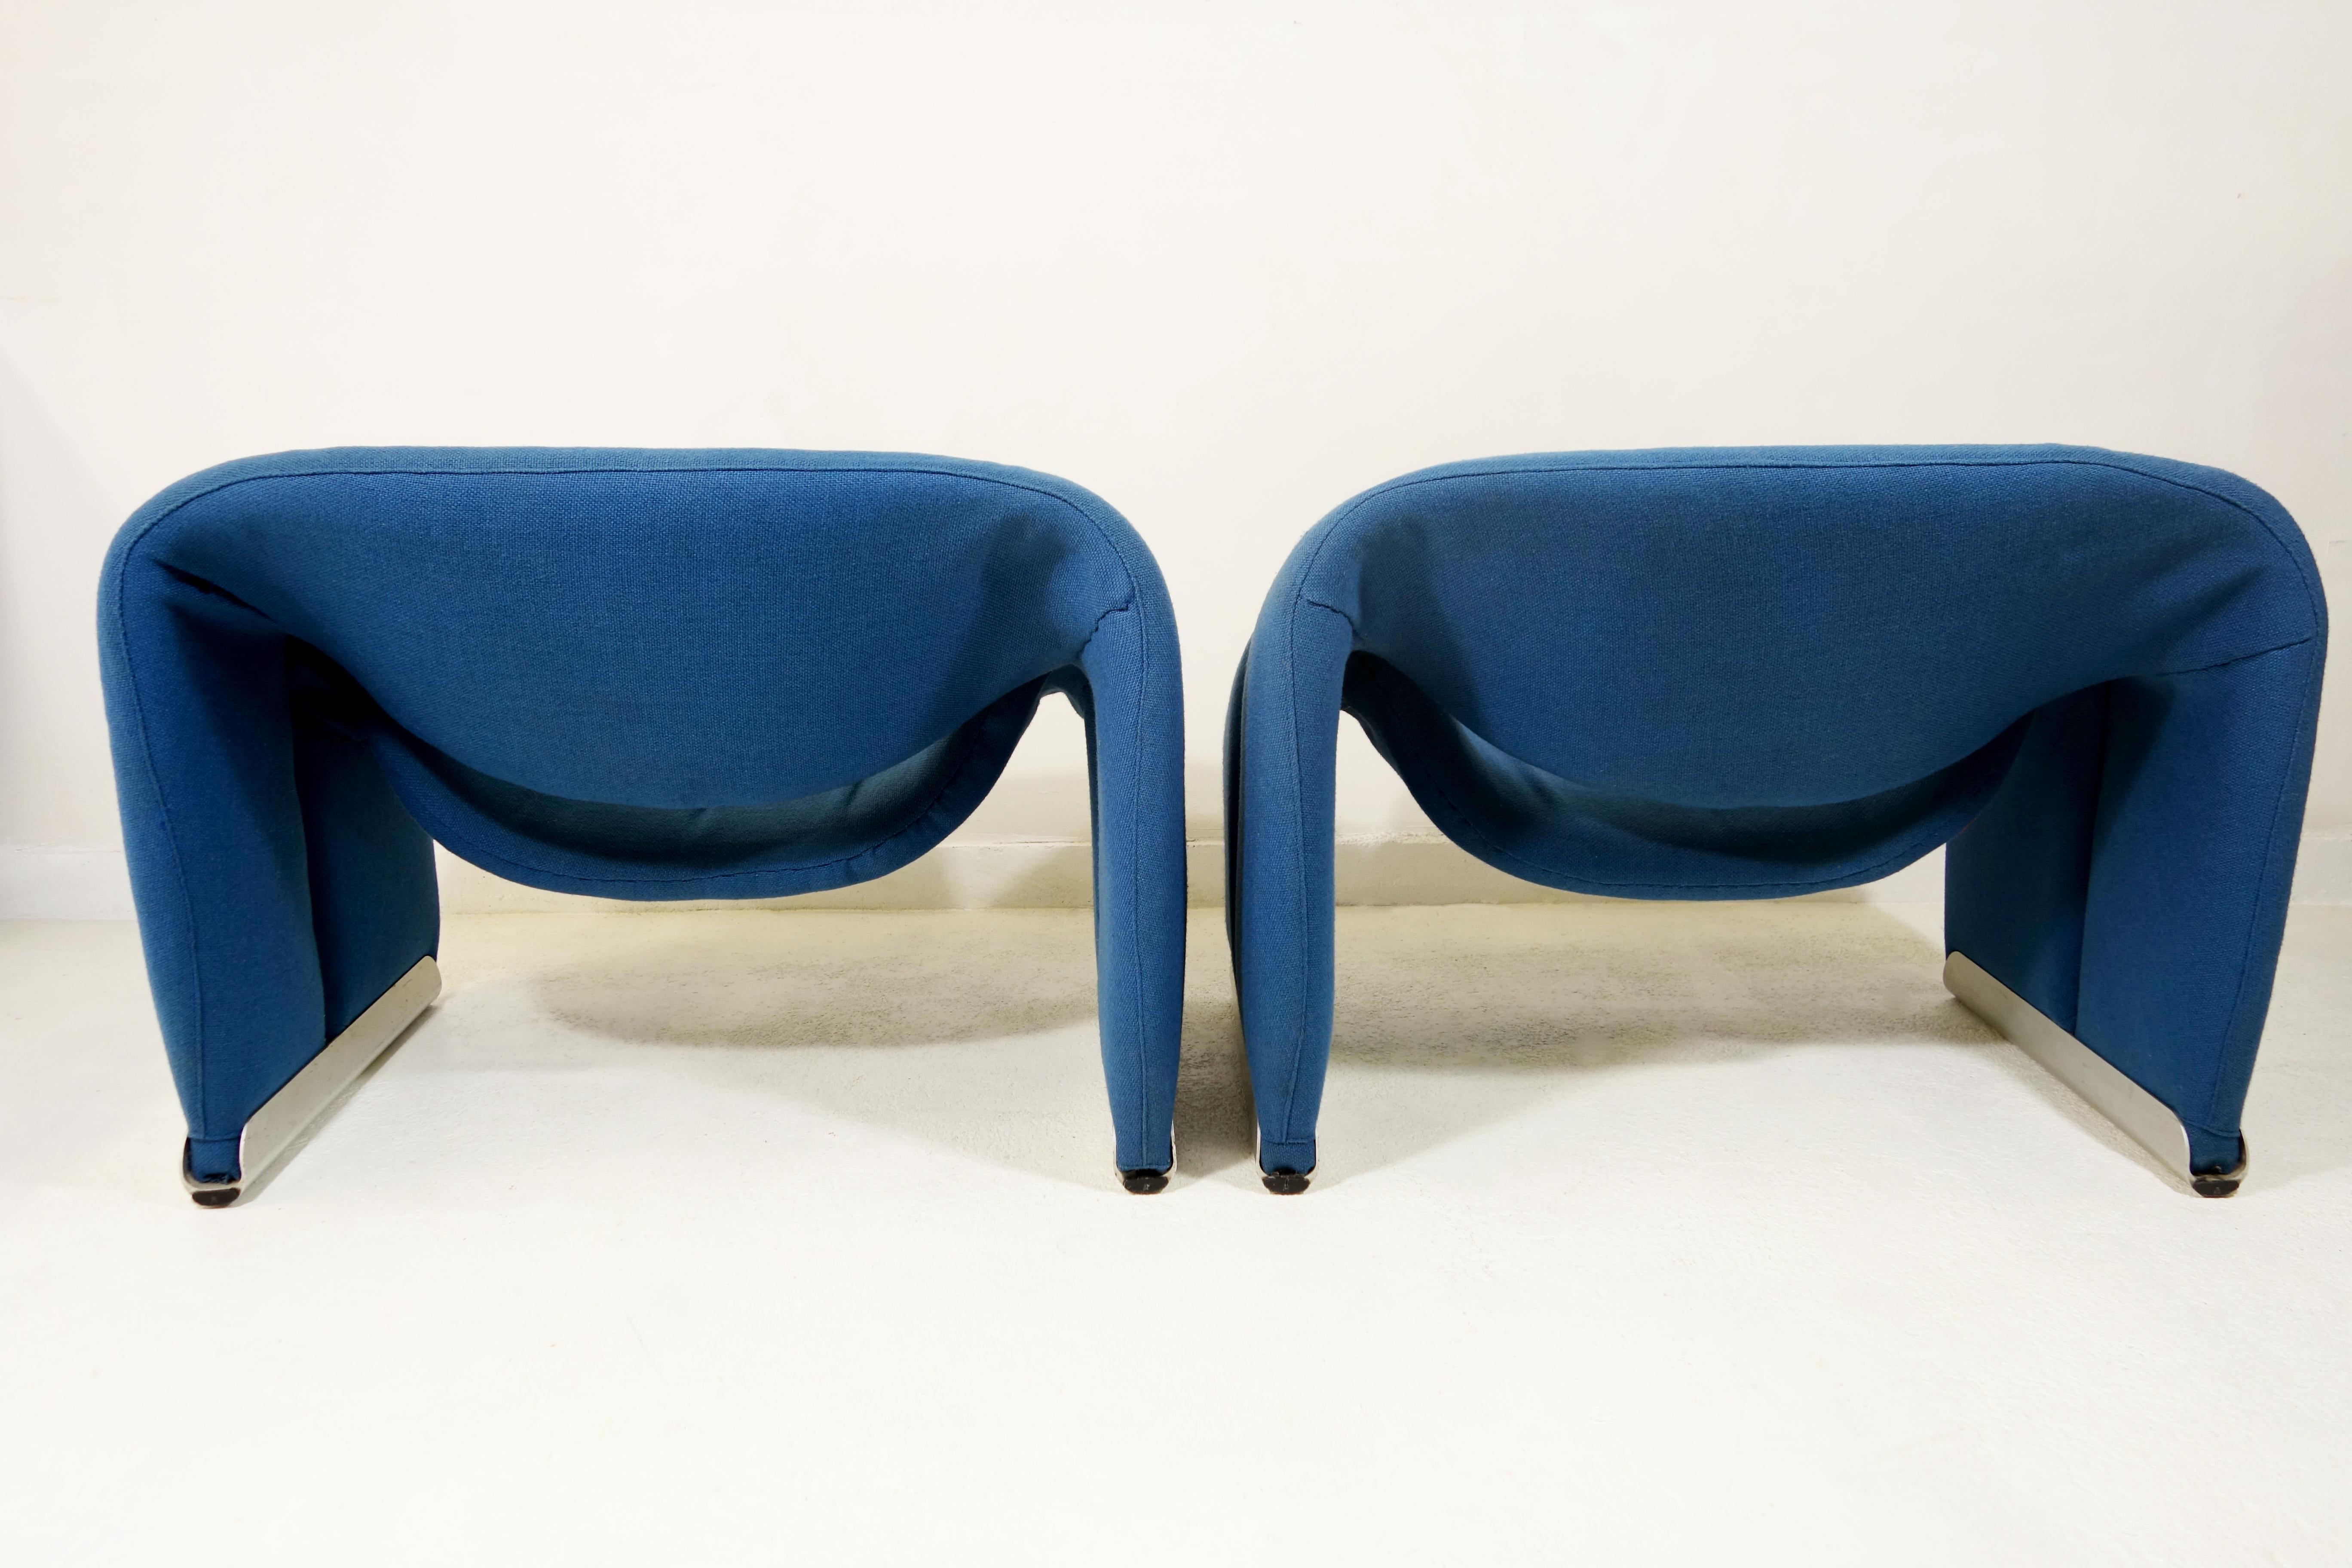 French Pair of Blue Midcentury Groovy Chairs F598 by Pierre Paulin for Artifort